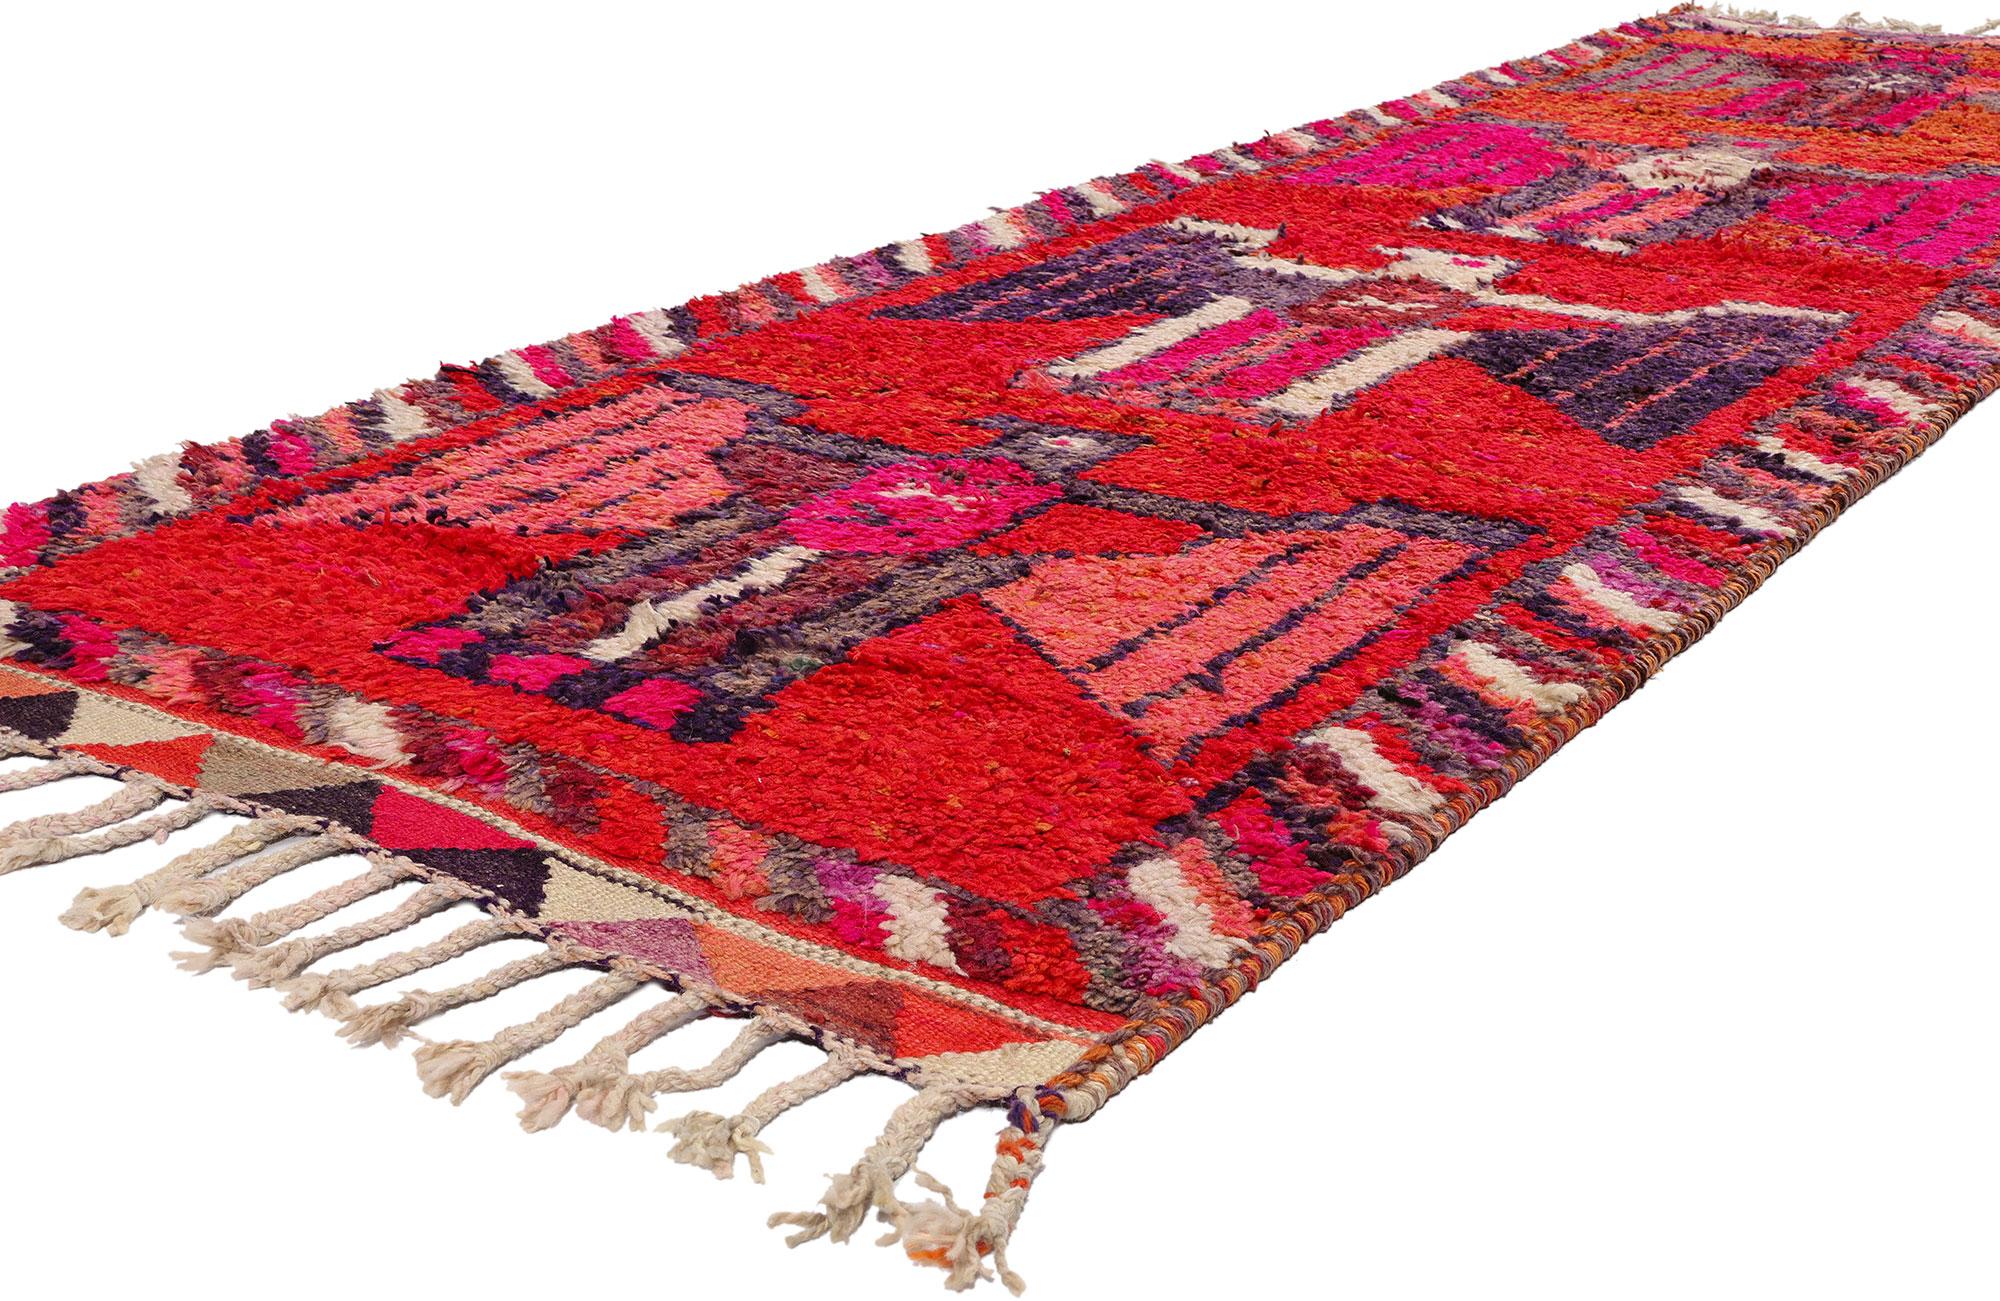 53888 Vintage Red Kurdish Eagle Pictorial Rug Runner, 03'04 x 11'04. Kurdish eagle pictorial rugs are traditional handwoven rugs featuring depictions of eagles predominantly made by Kurdish tribes across Kurdistan. These rugs commonly portray eagles